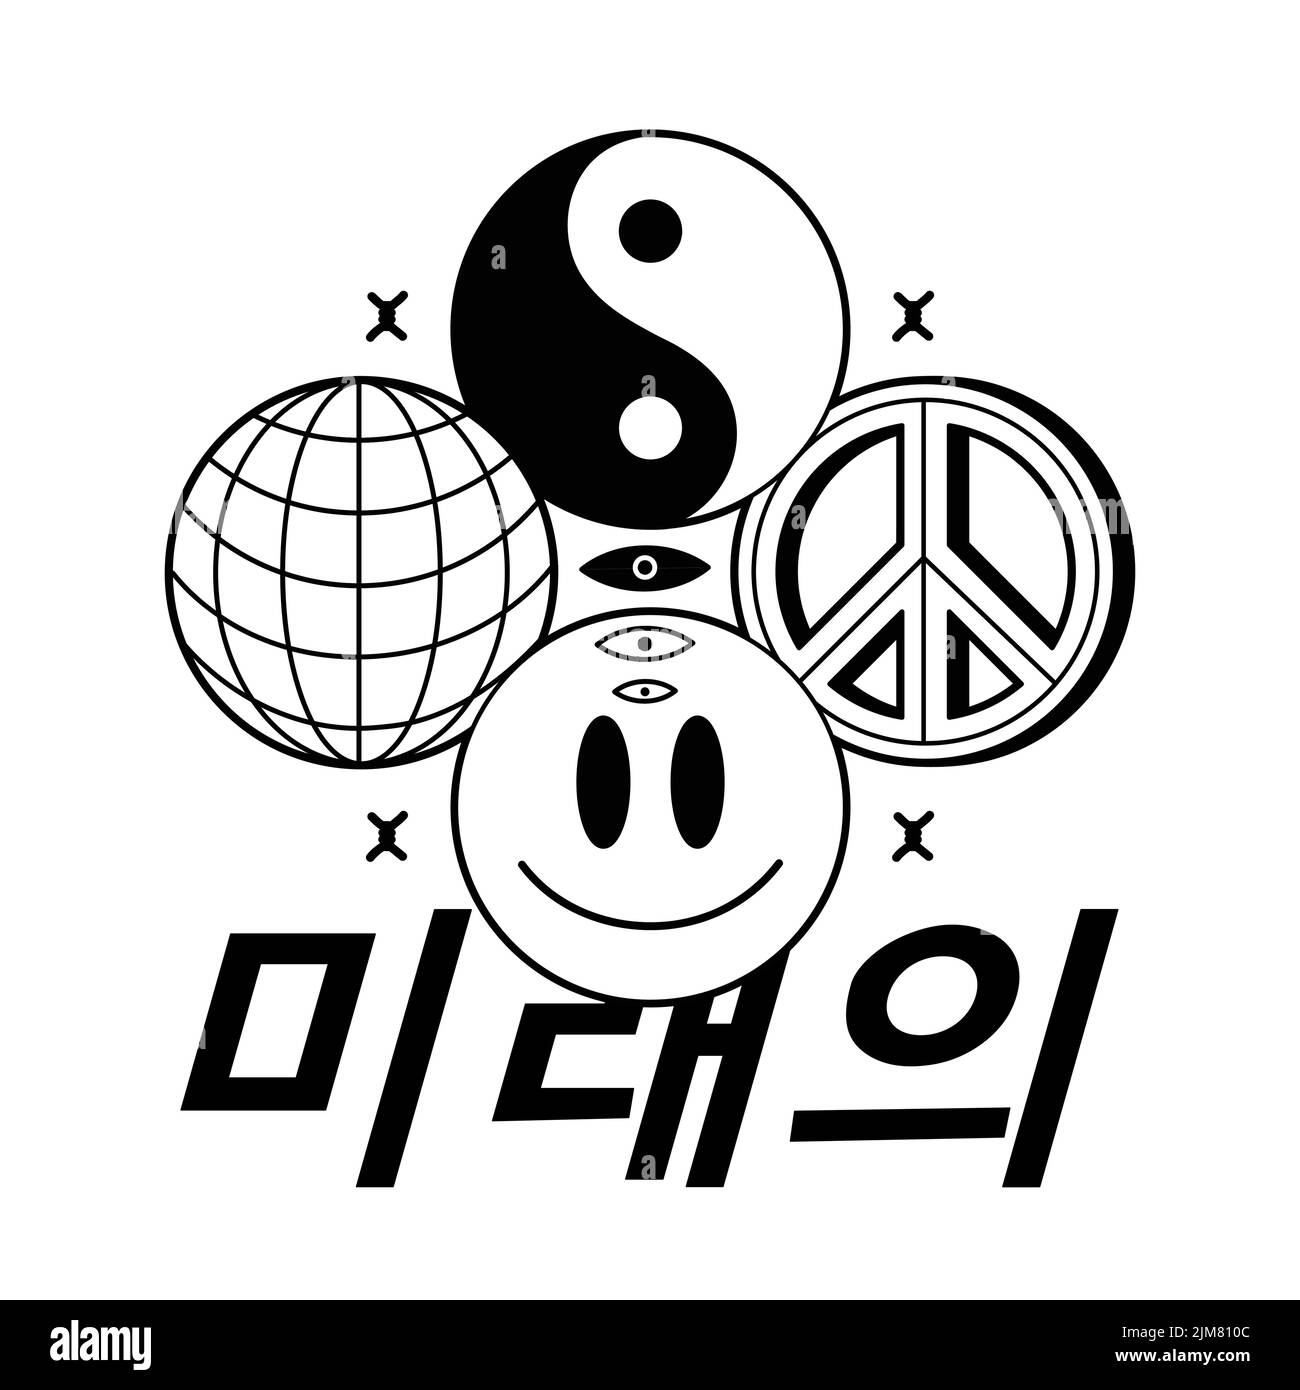 Translation:'Future'.Yin Yang,sphere,smile face,peace signs.Vector line graphic illustration logo design.Yin yang,earth sphere,smile face,hippie peace symbol,techno,glitch print for t-shirt,poster art Stock Vector